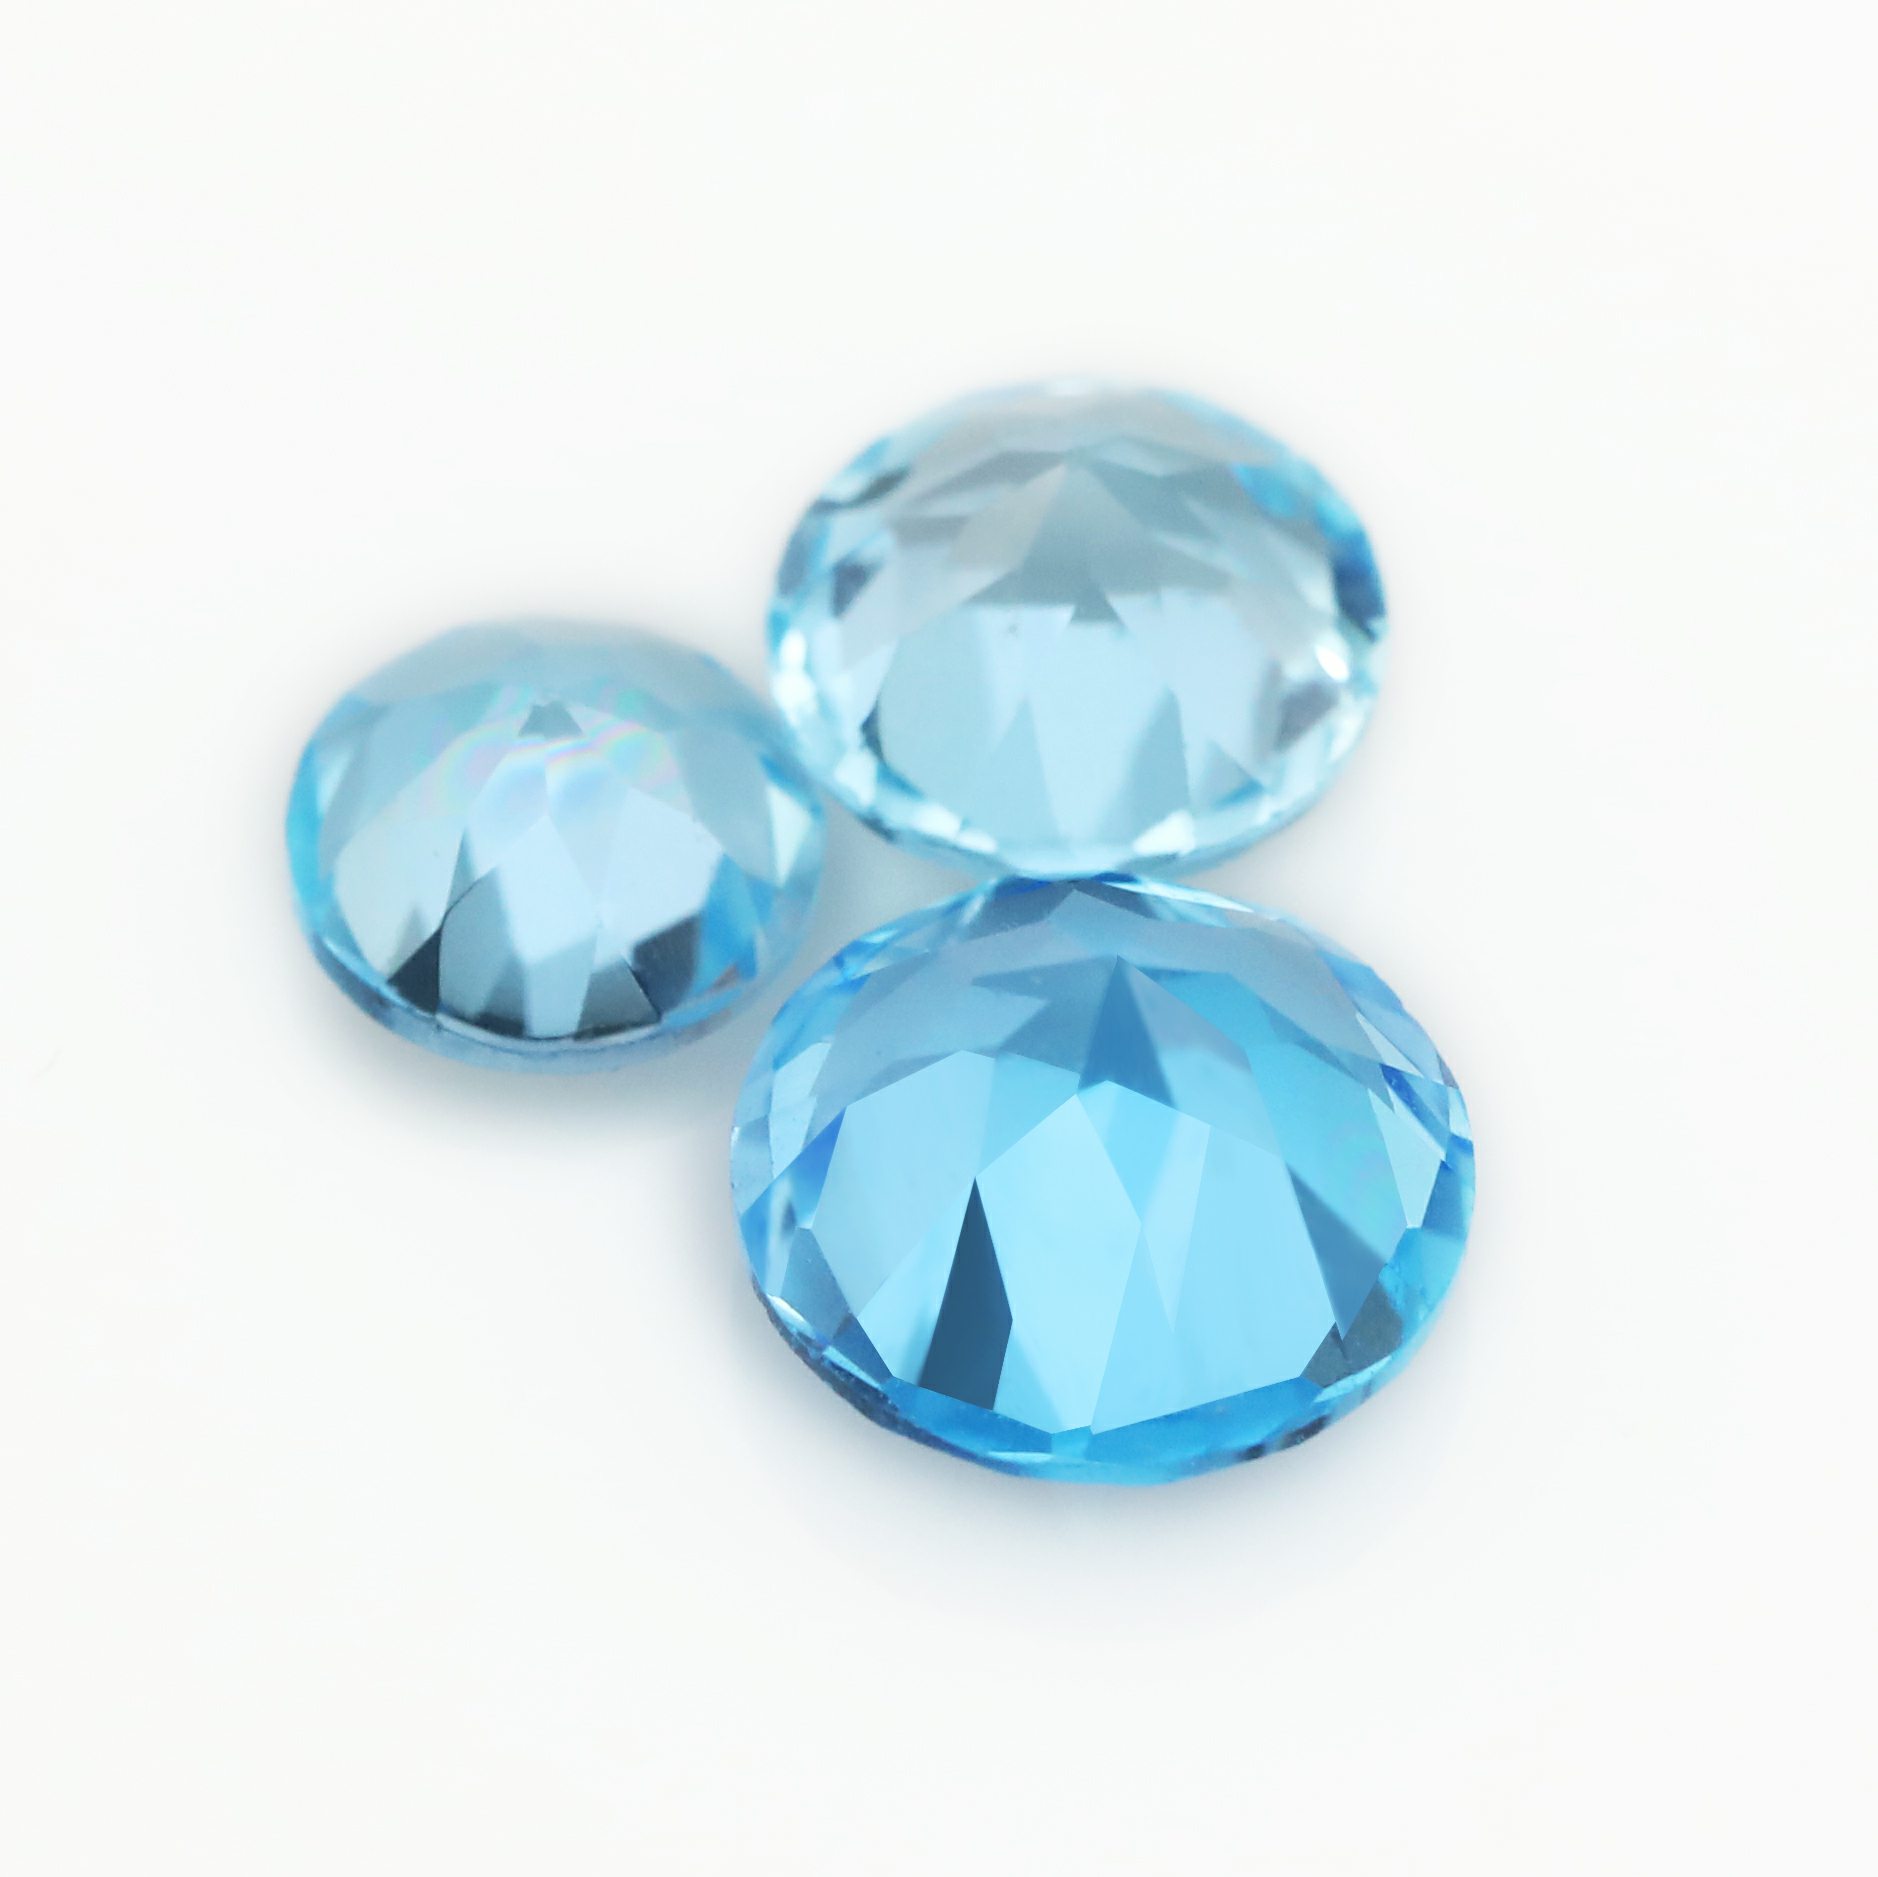 1Pcs Faceted Round Swiss Blue Topaz Nature Point Back Gemstone November Birthstone DIY Loose Stone Supplies 4110182 - Click Image to Close